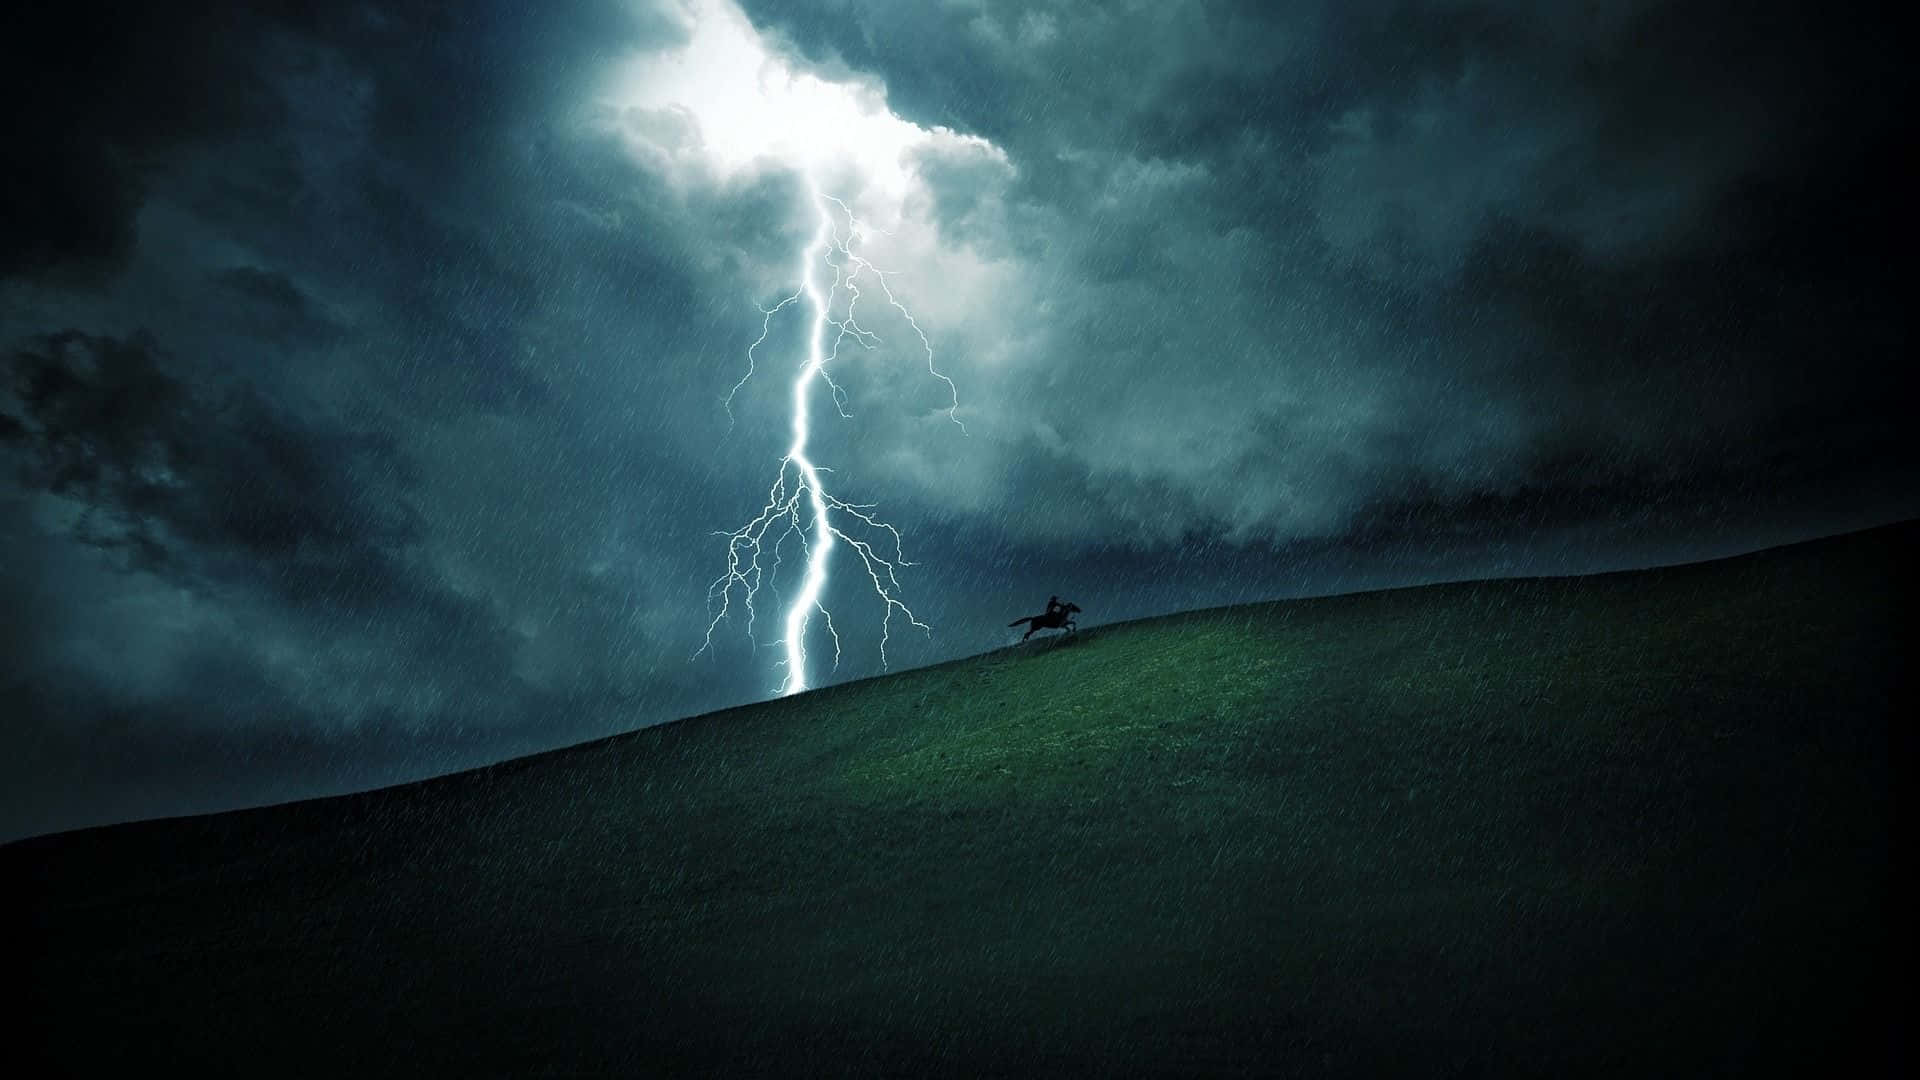 Experience the power of a summer thunderstorm